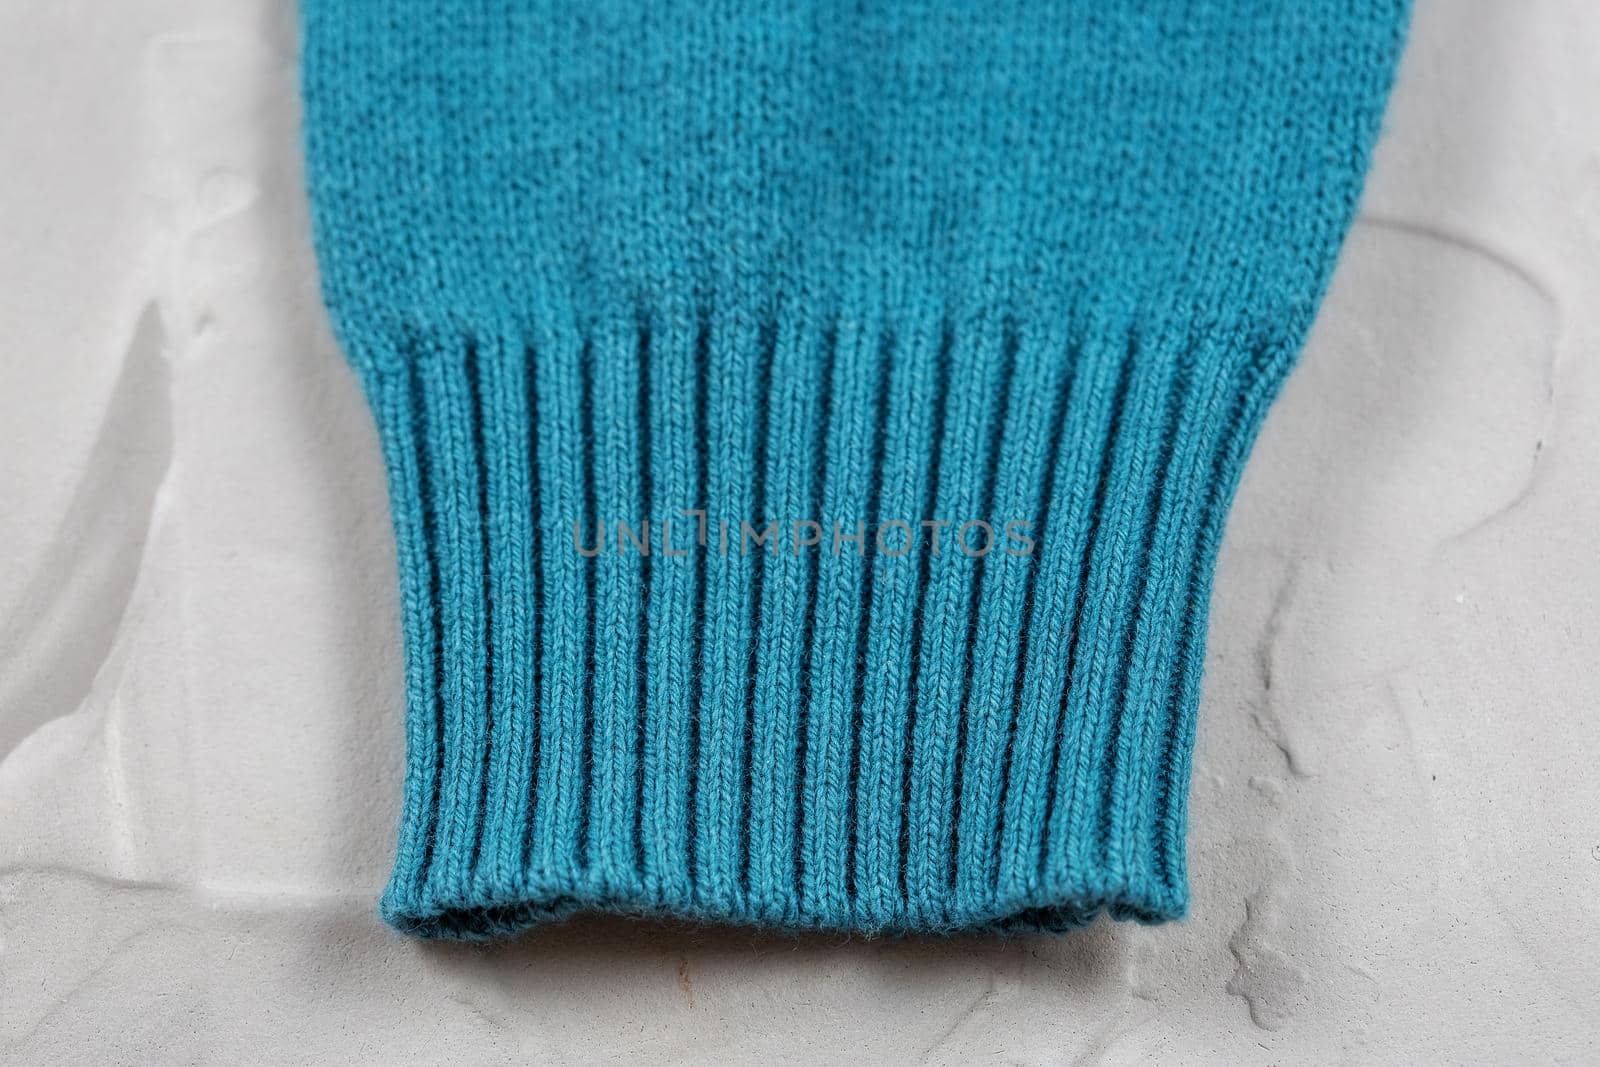 Close-up of knitted elastic blue sweater cuff.